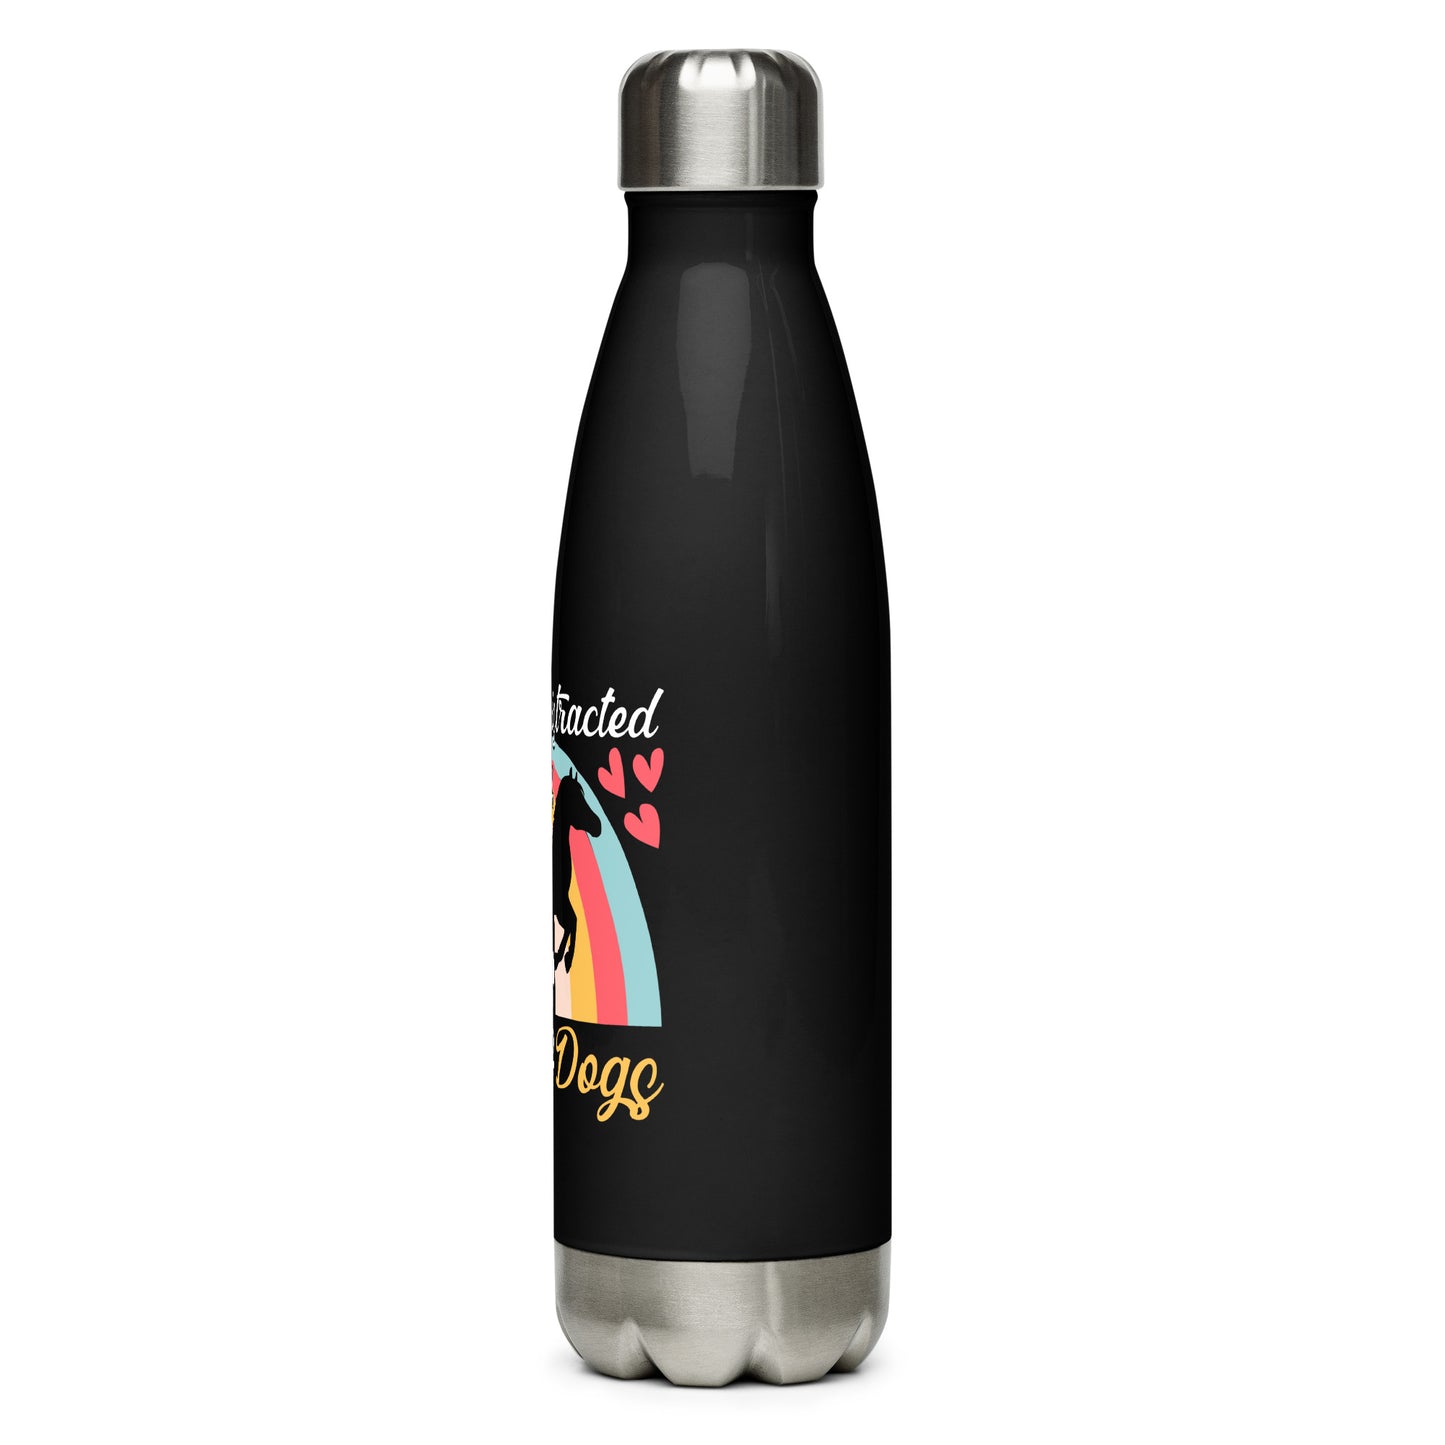 Easily Distracted by Horse and Dogs Stainless Steel Water Bottle